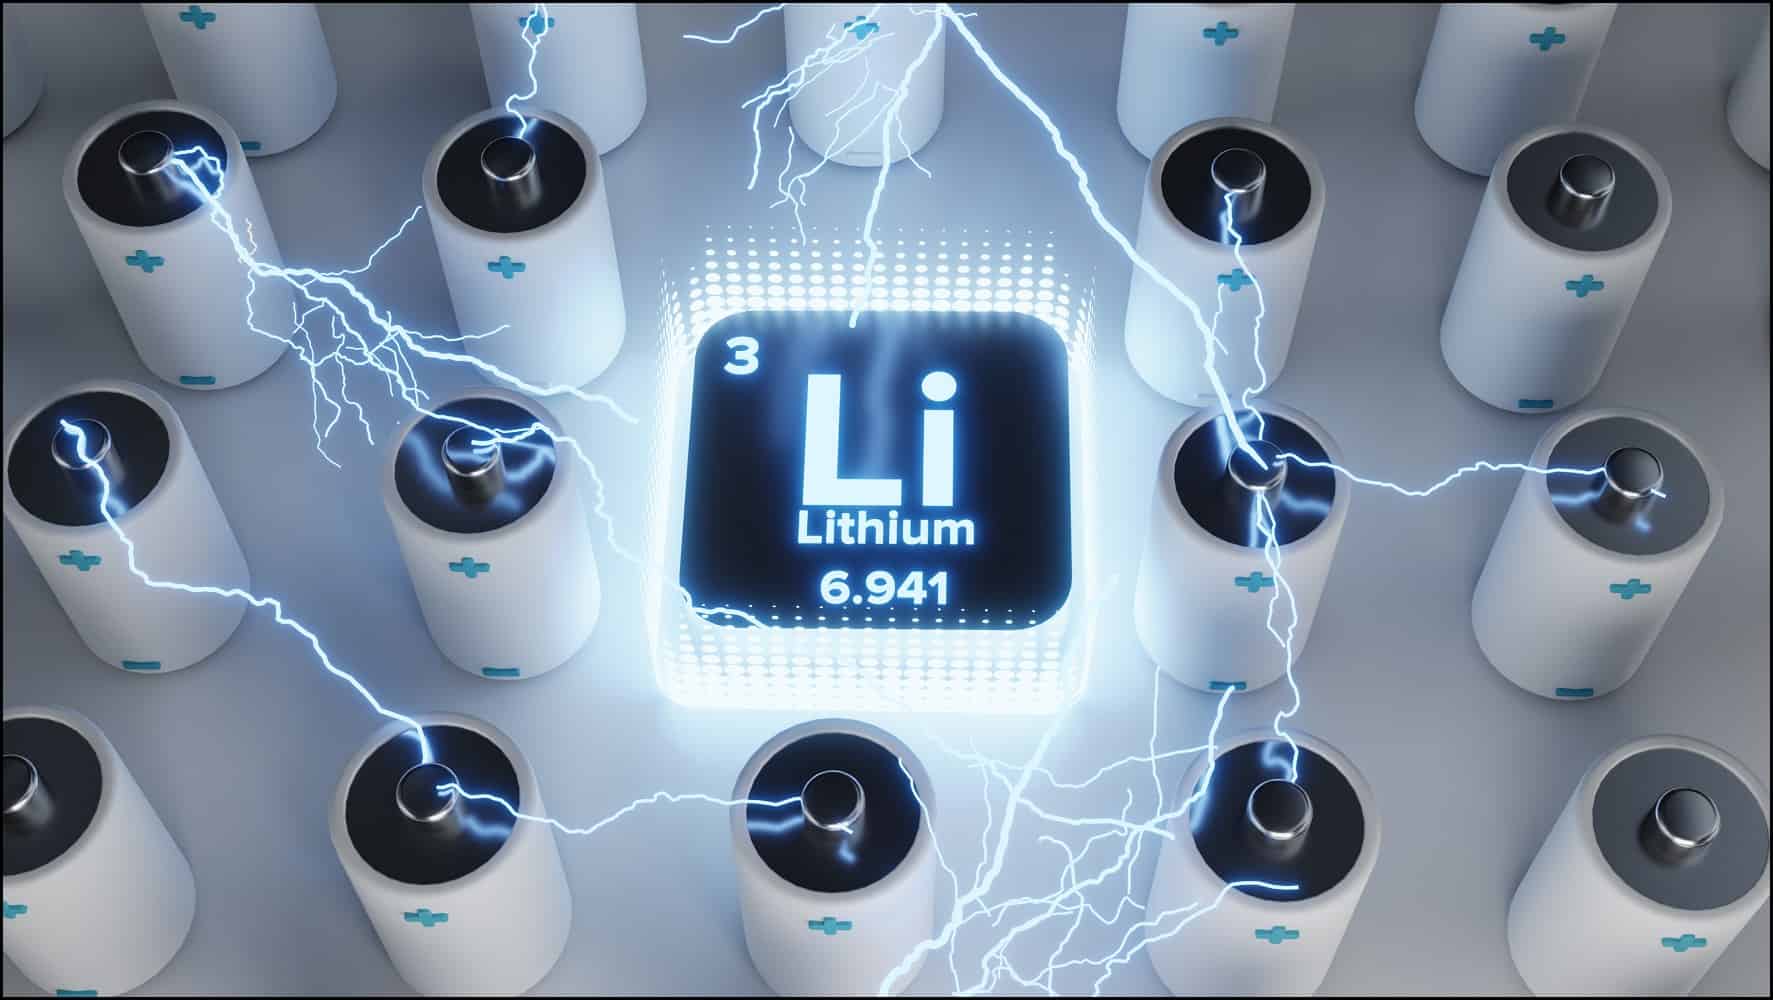 Lithium Prices Soar as Demand Surges Amid EV Boom, But Is the Bull Run Sustainable